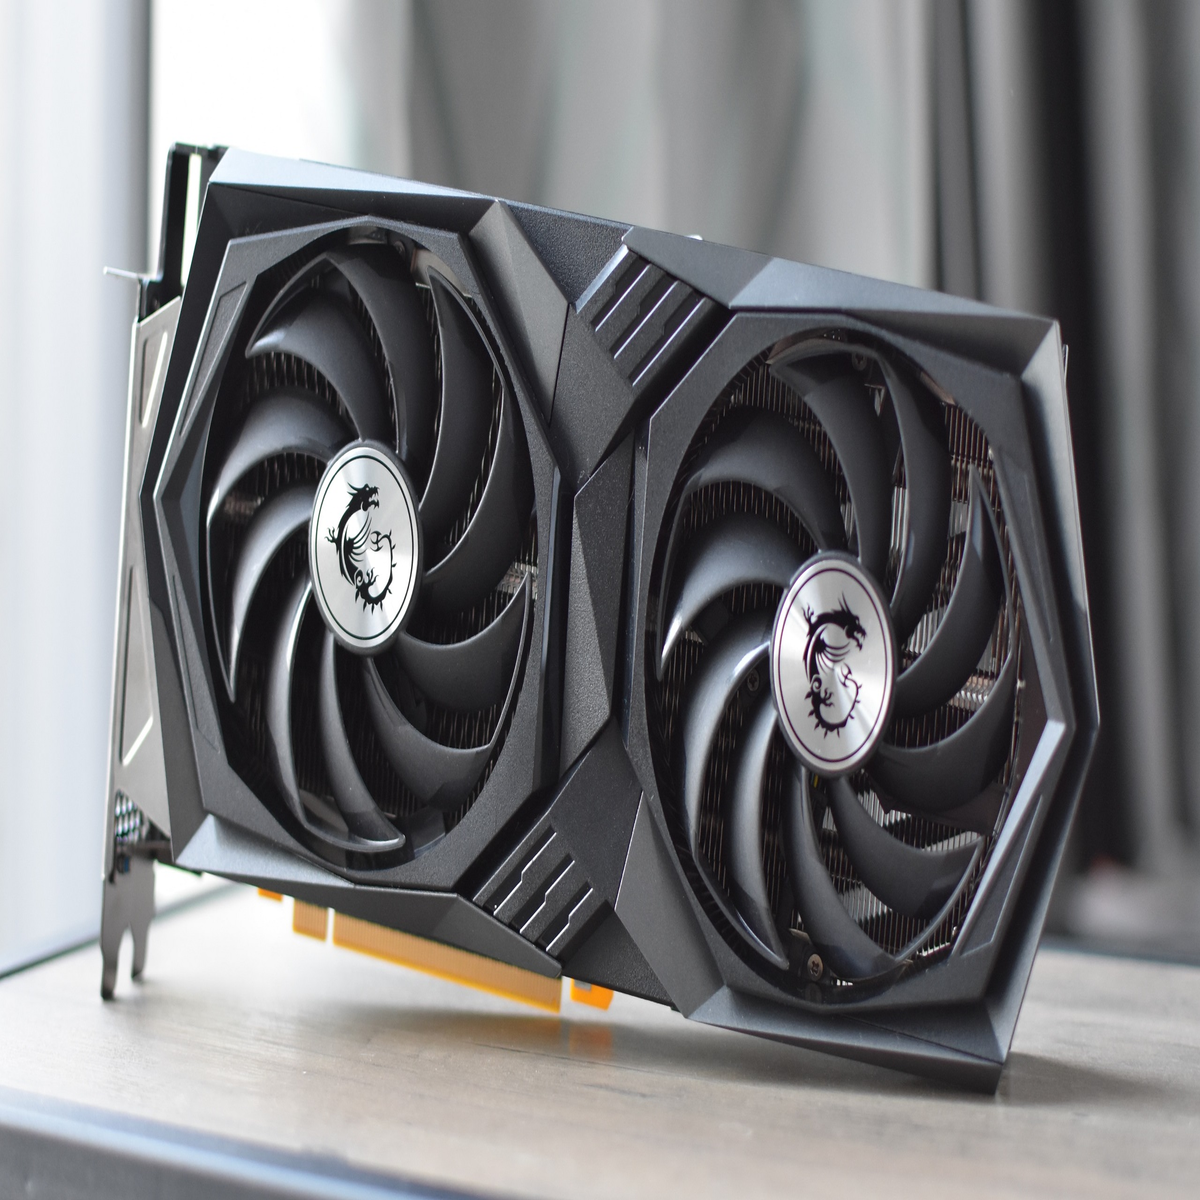 Nvidia GeForce RTX 3050 Review